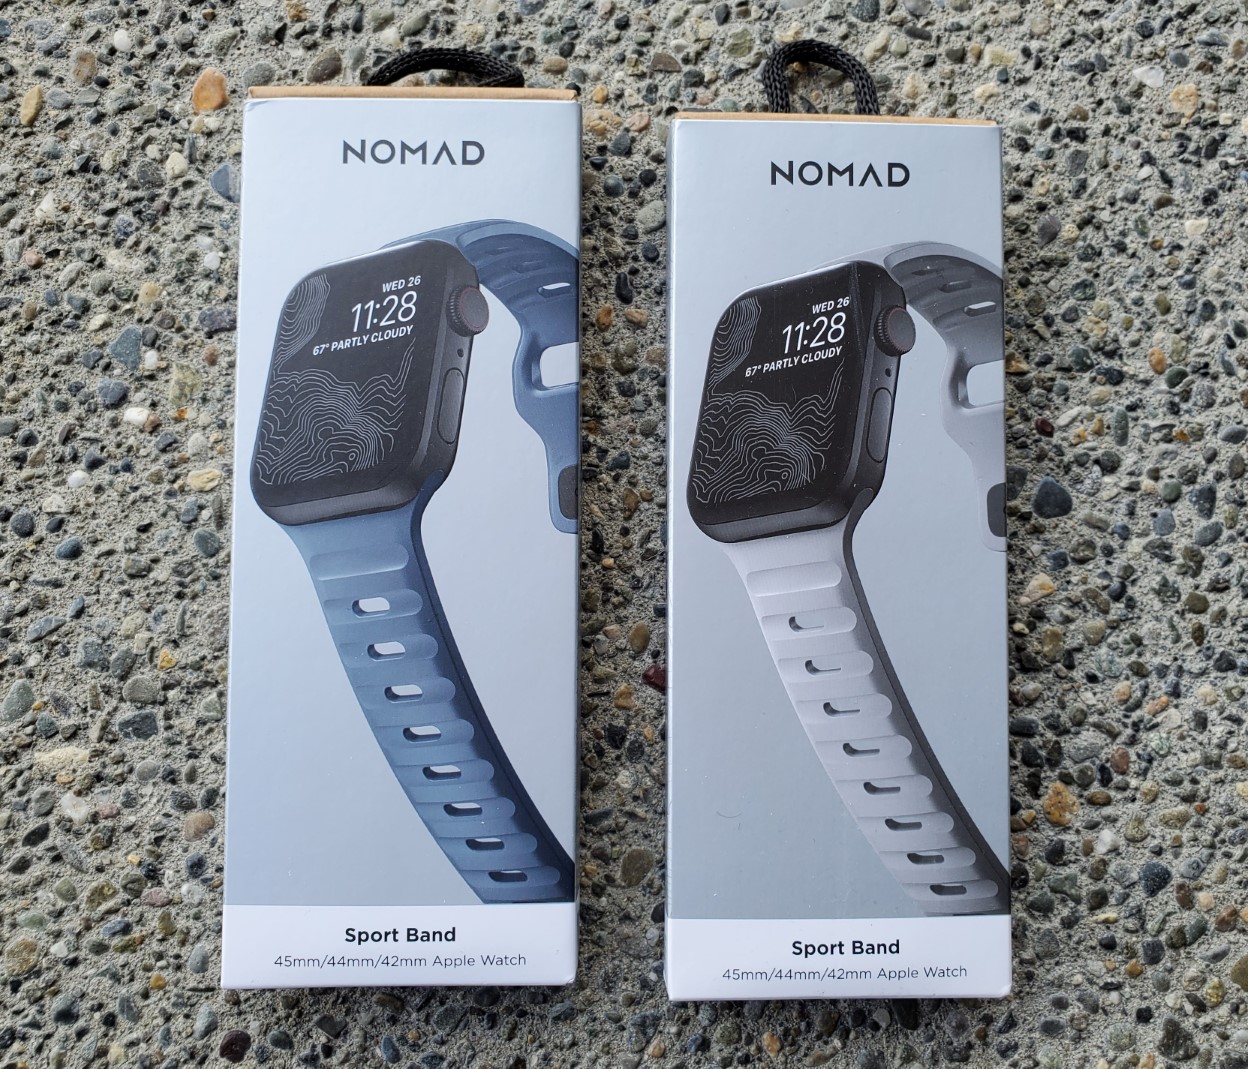 Nomad Sport band for Apple Watch 7 Optimal ventilation, light weight, high quality materials